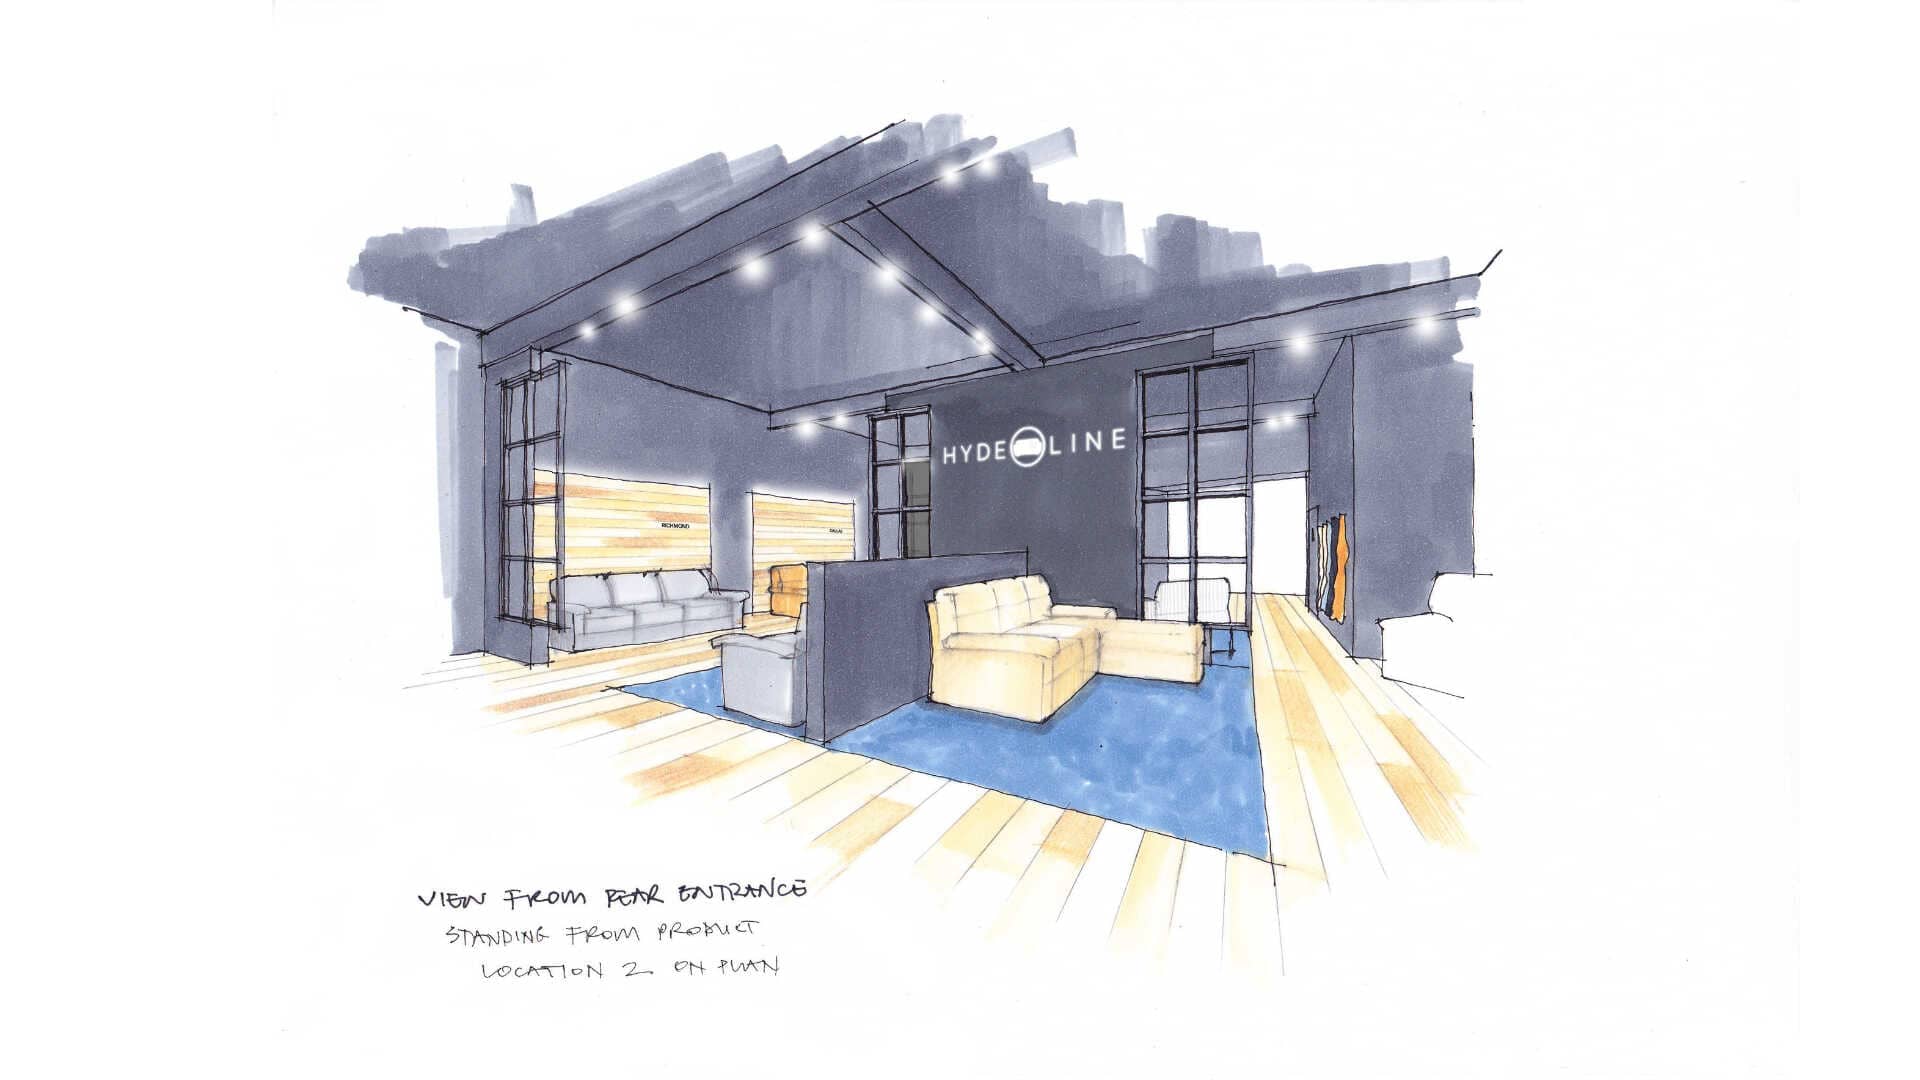 concept sketch from the furniture exhibition entrance